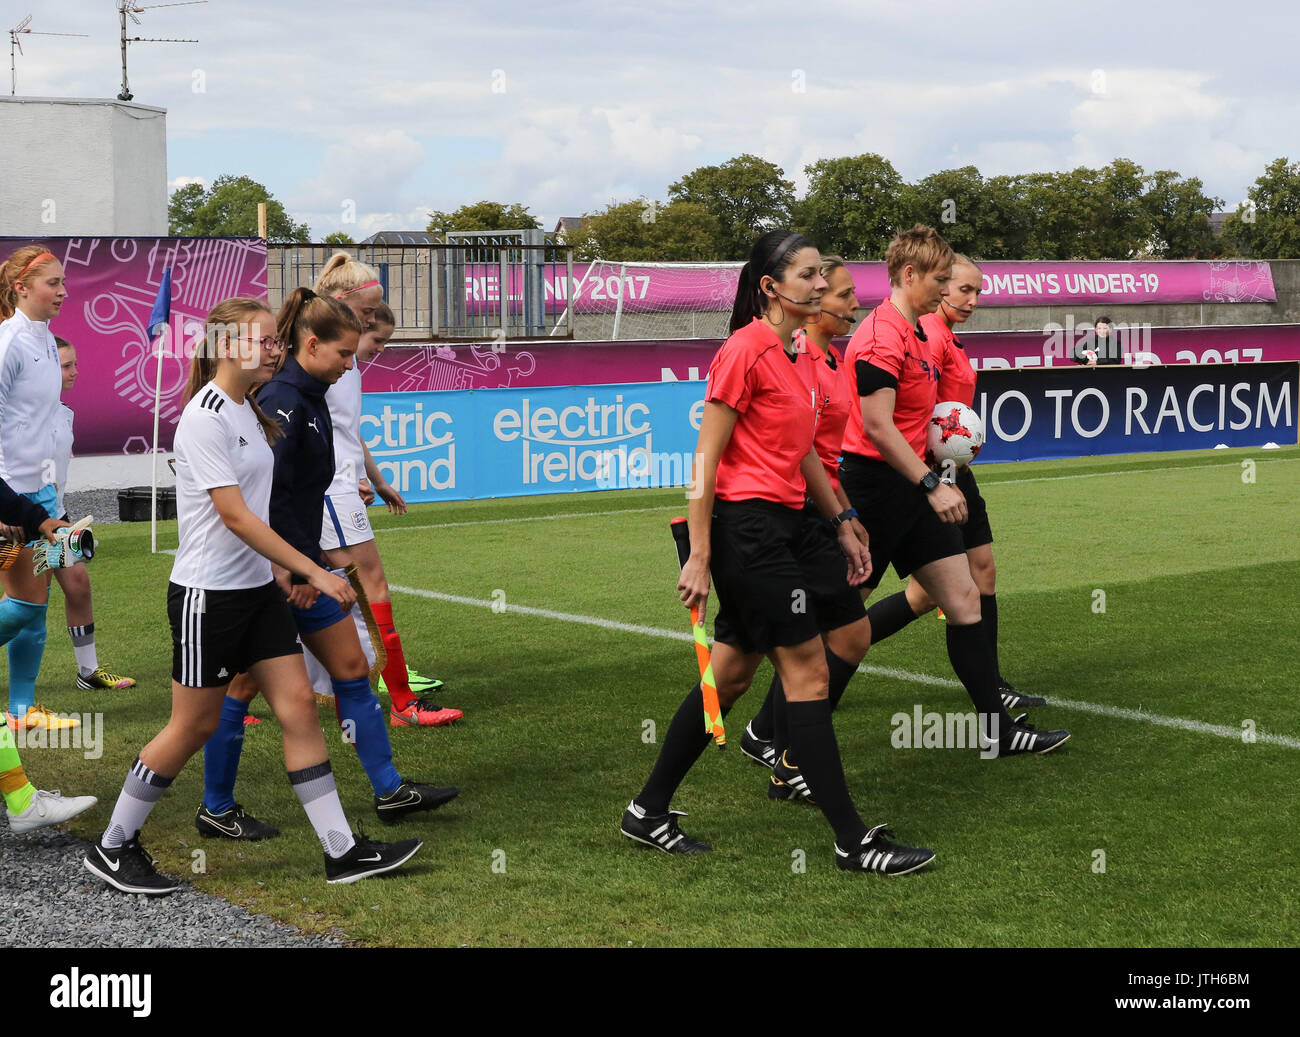 Mourneview Park, Lurgan, Northern Ireland. 08 August 2017. UEFA Women's Under-19 Championship Group B – Italy v England. The match officials and teams come out. Credit: David Hunter/Alamy Live News. Stock Photo